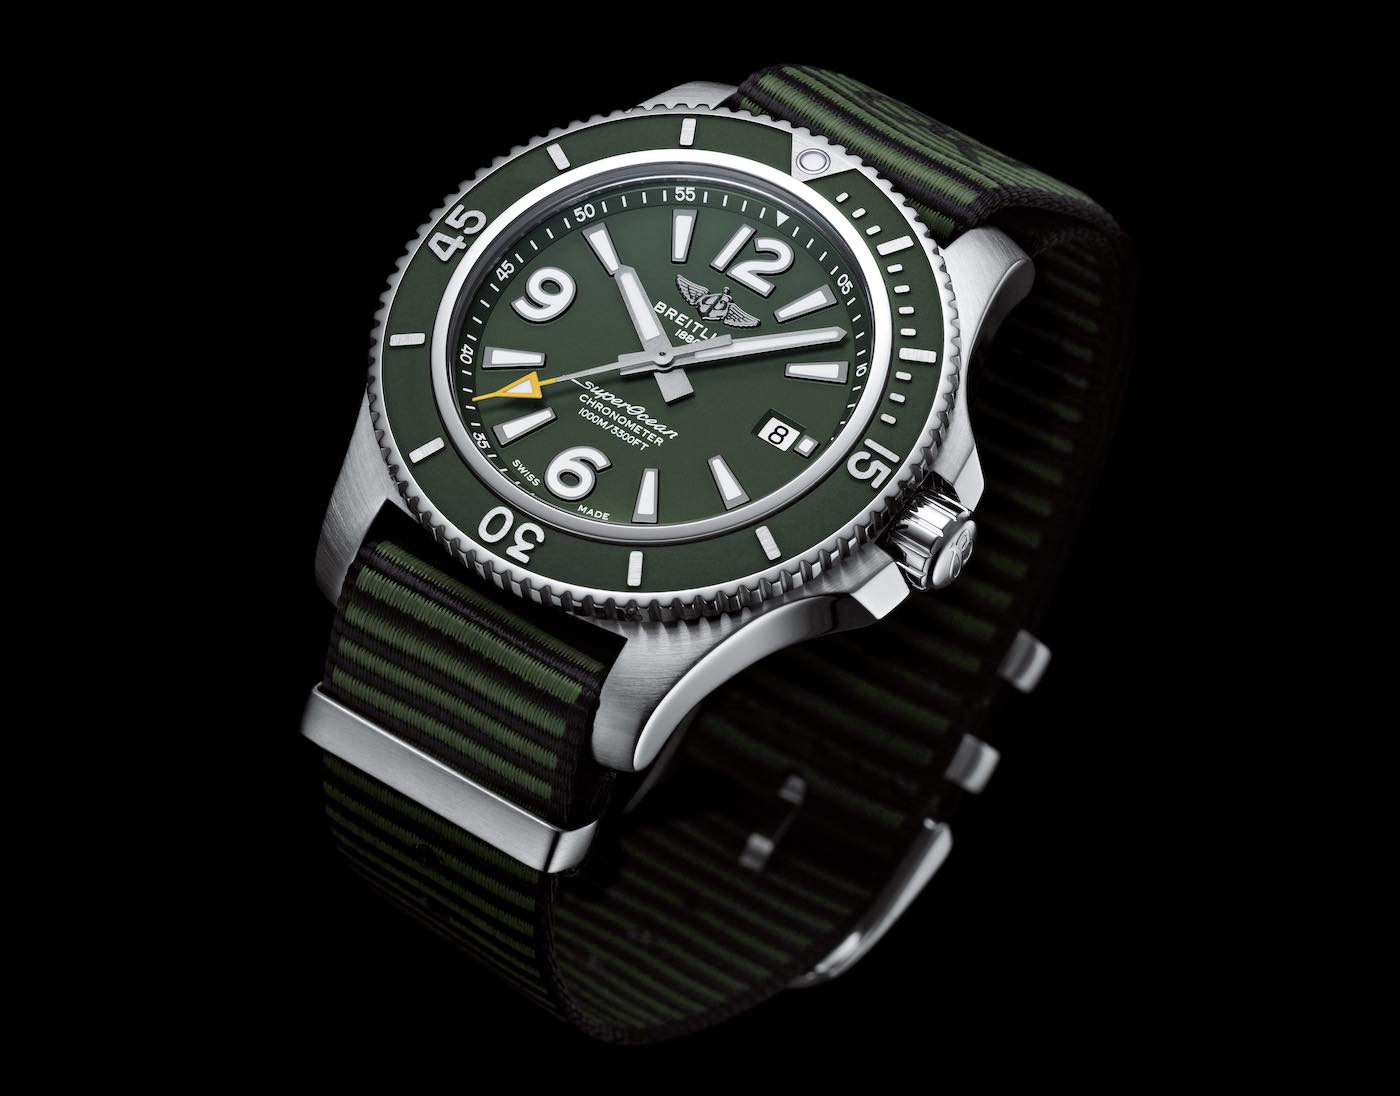 Breitling-Superocean-Automatic-44-Outerknown-Watch-And-Outerknown-NATO-Strap-Collection